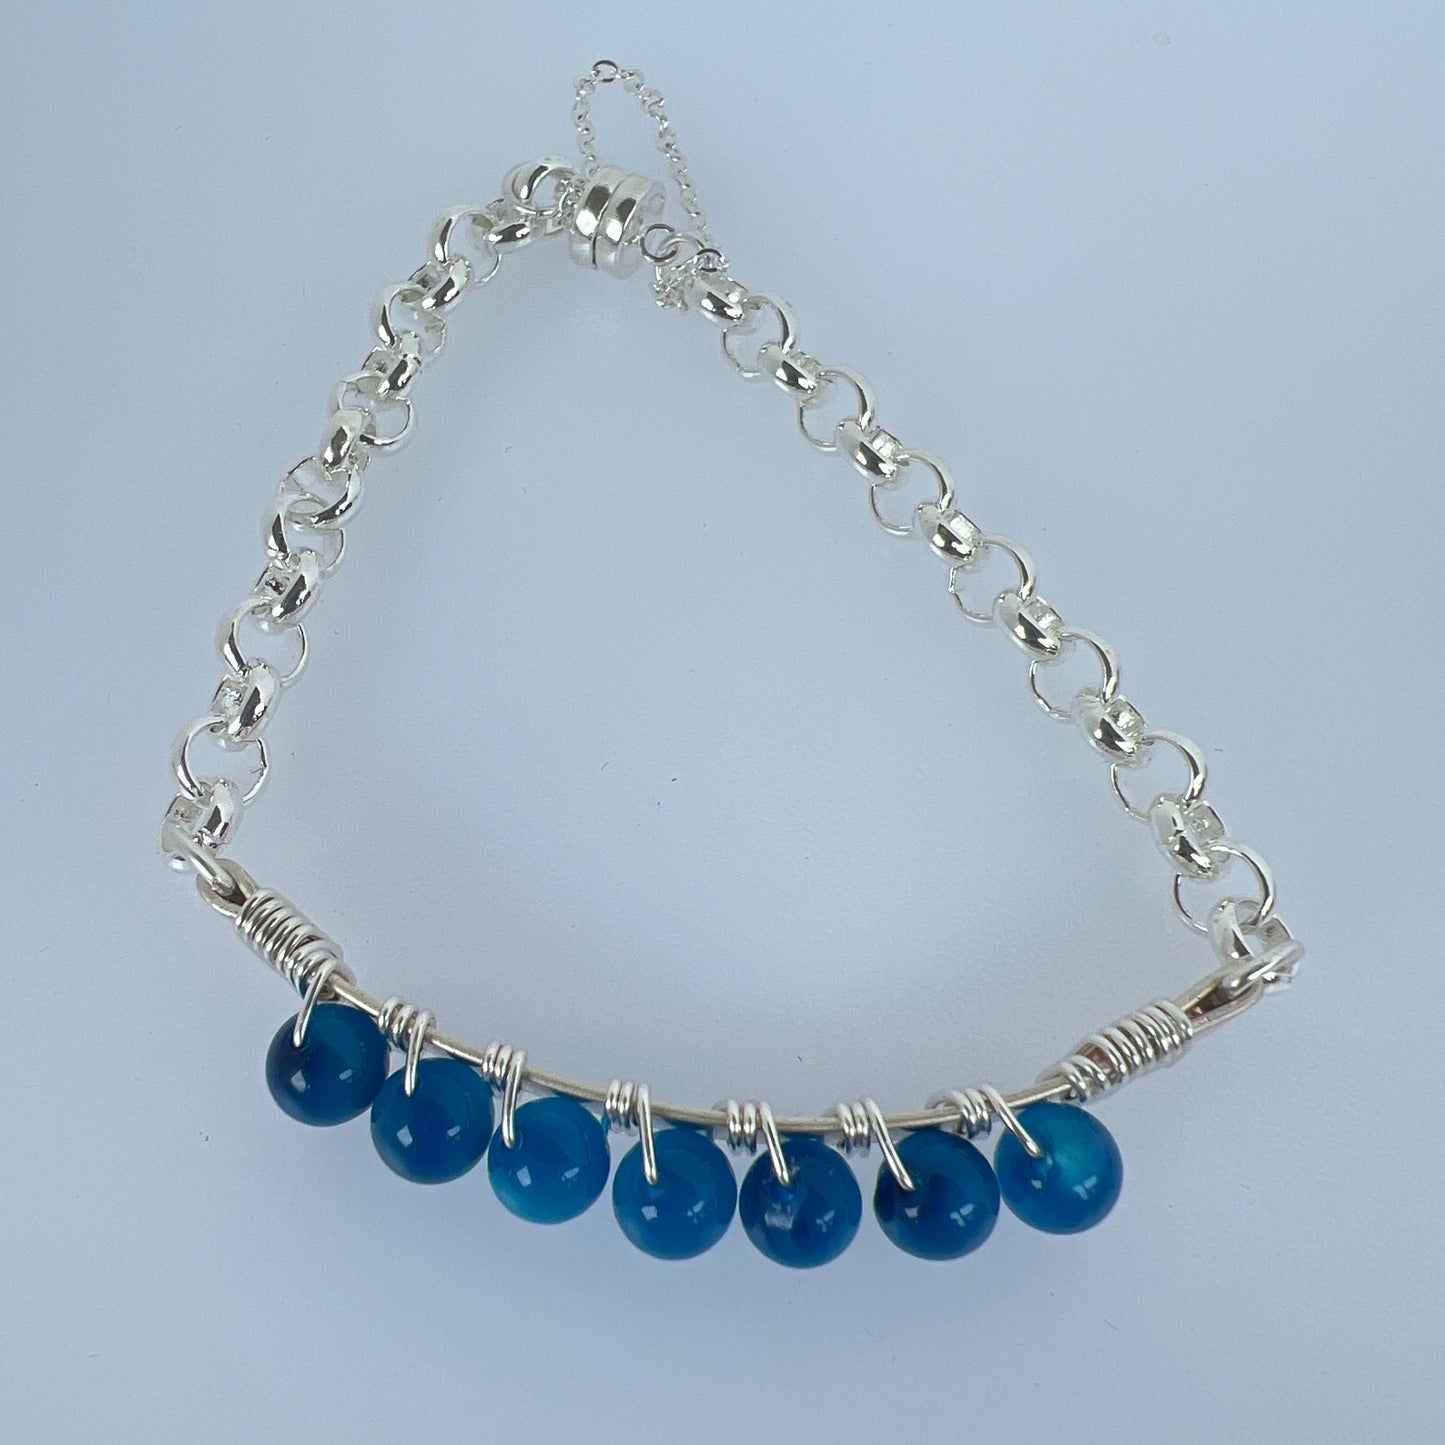 6mm blue agate beads wire wrapped on silver plated with silver plate magnet bracelet